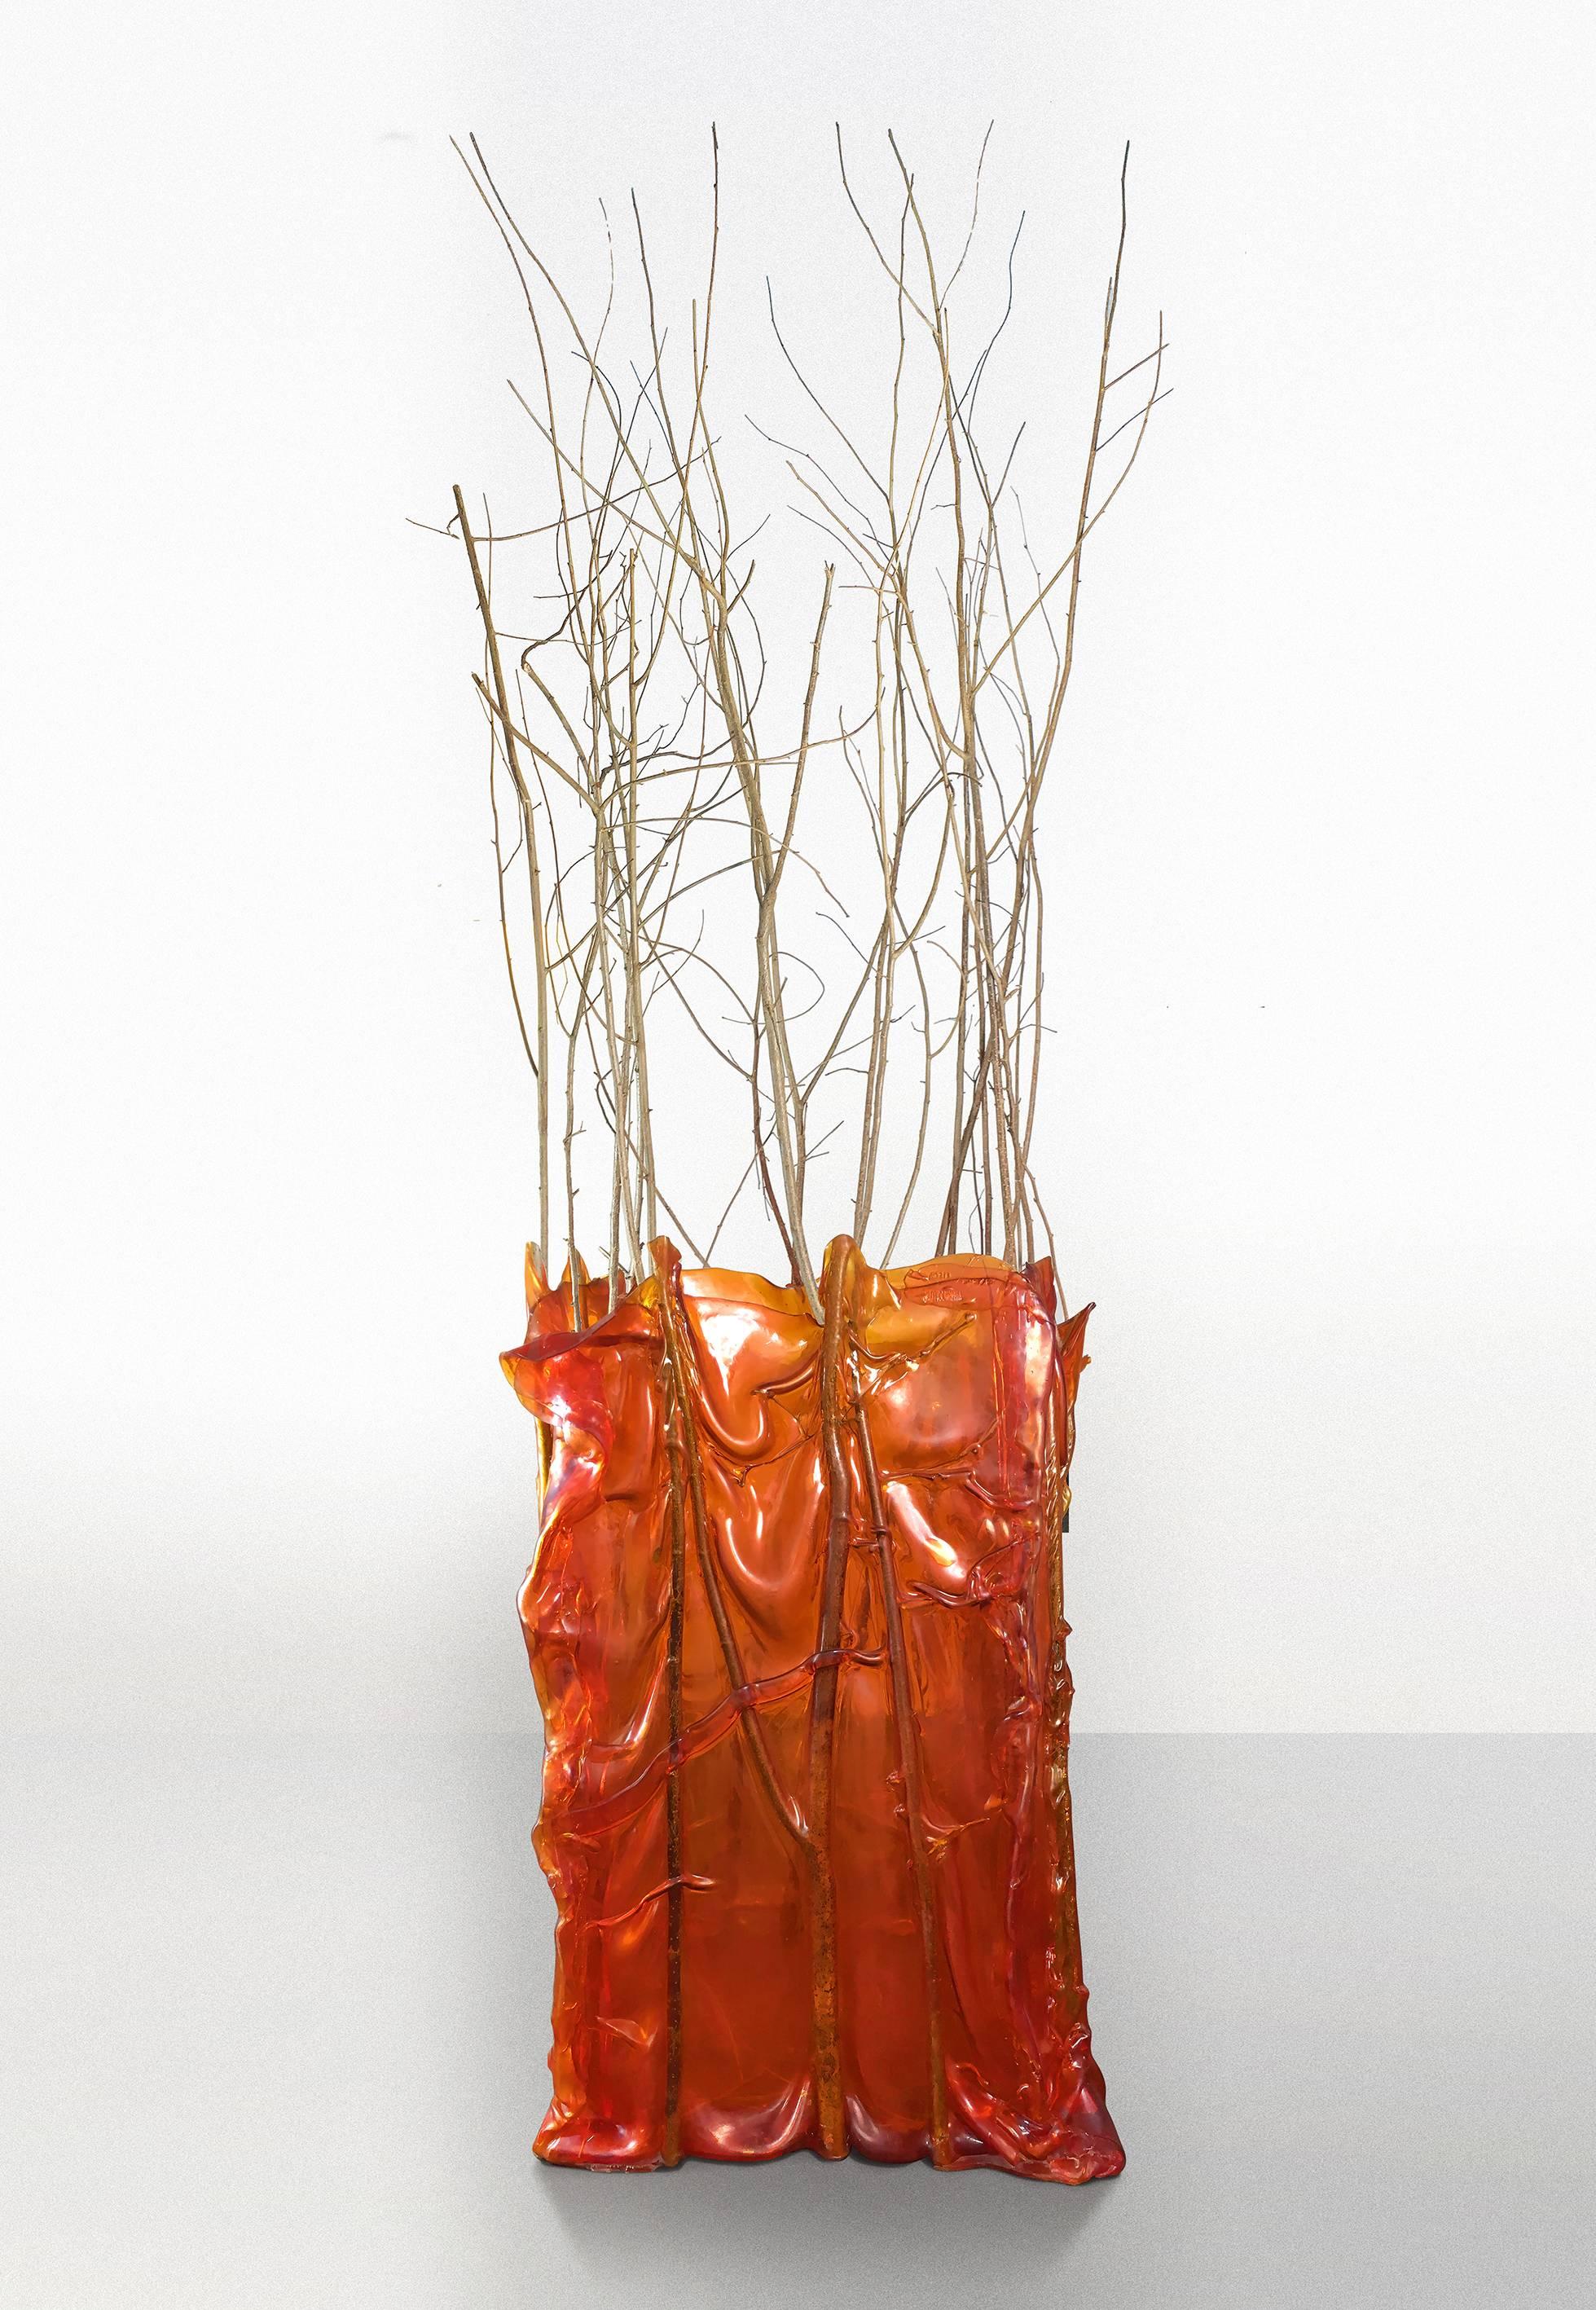 High floor vase made of red resin and natural dry brushes designed by Fernando and Humberto Campana. Limited edition piece (1/30) was exposed in Trienale di Milano museum. On the resin can be seen the stamp with designer sign and edition information.